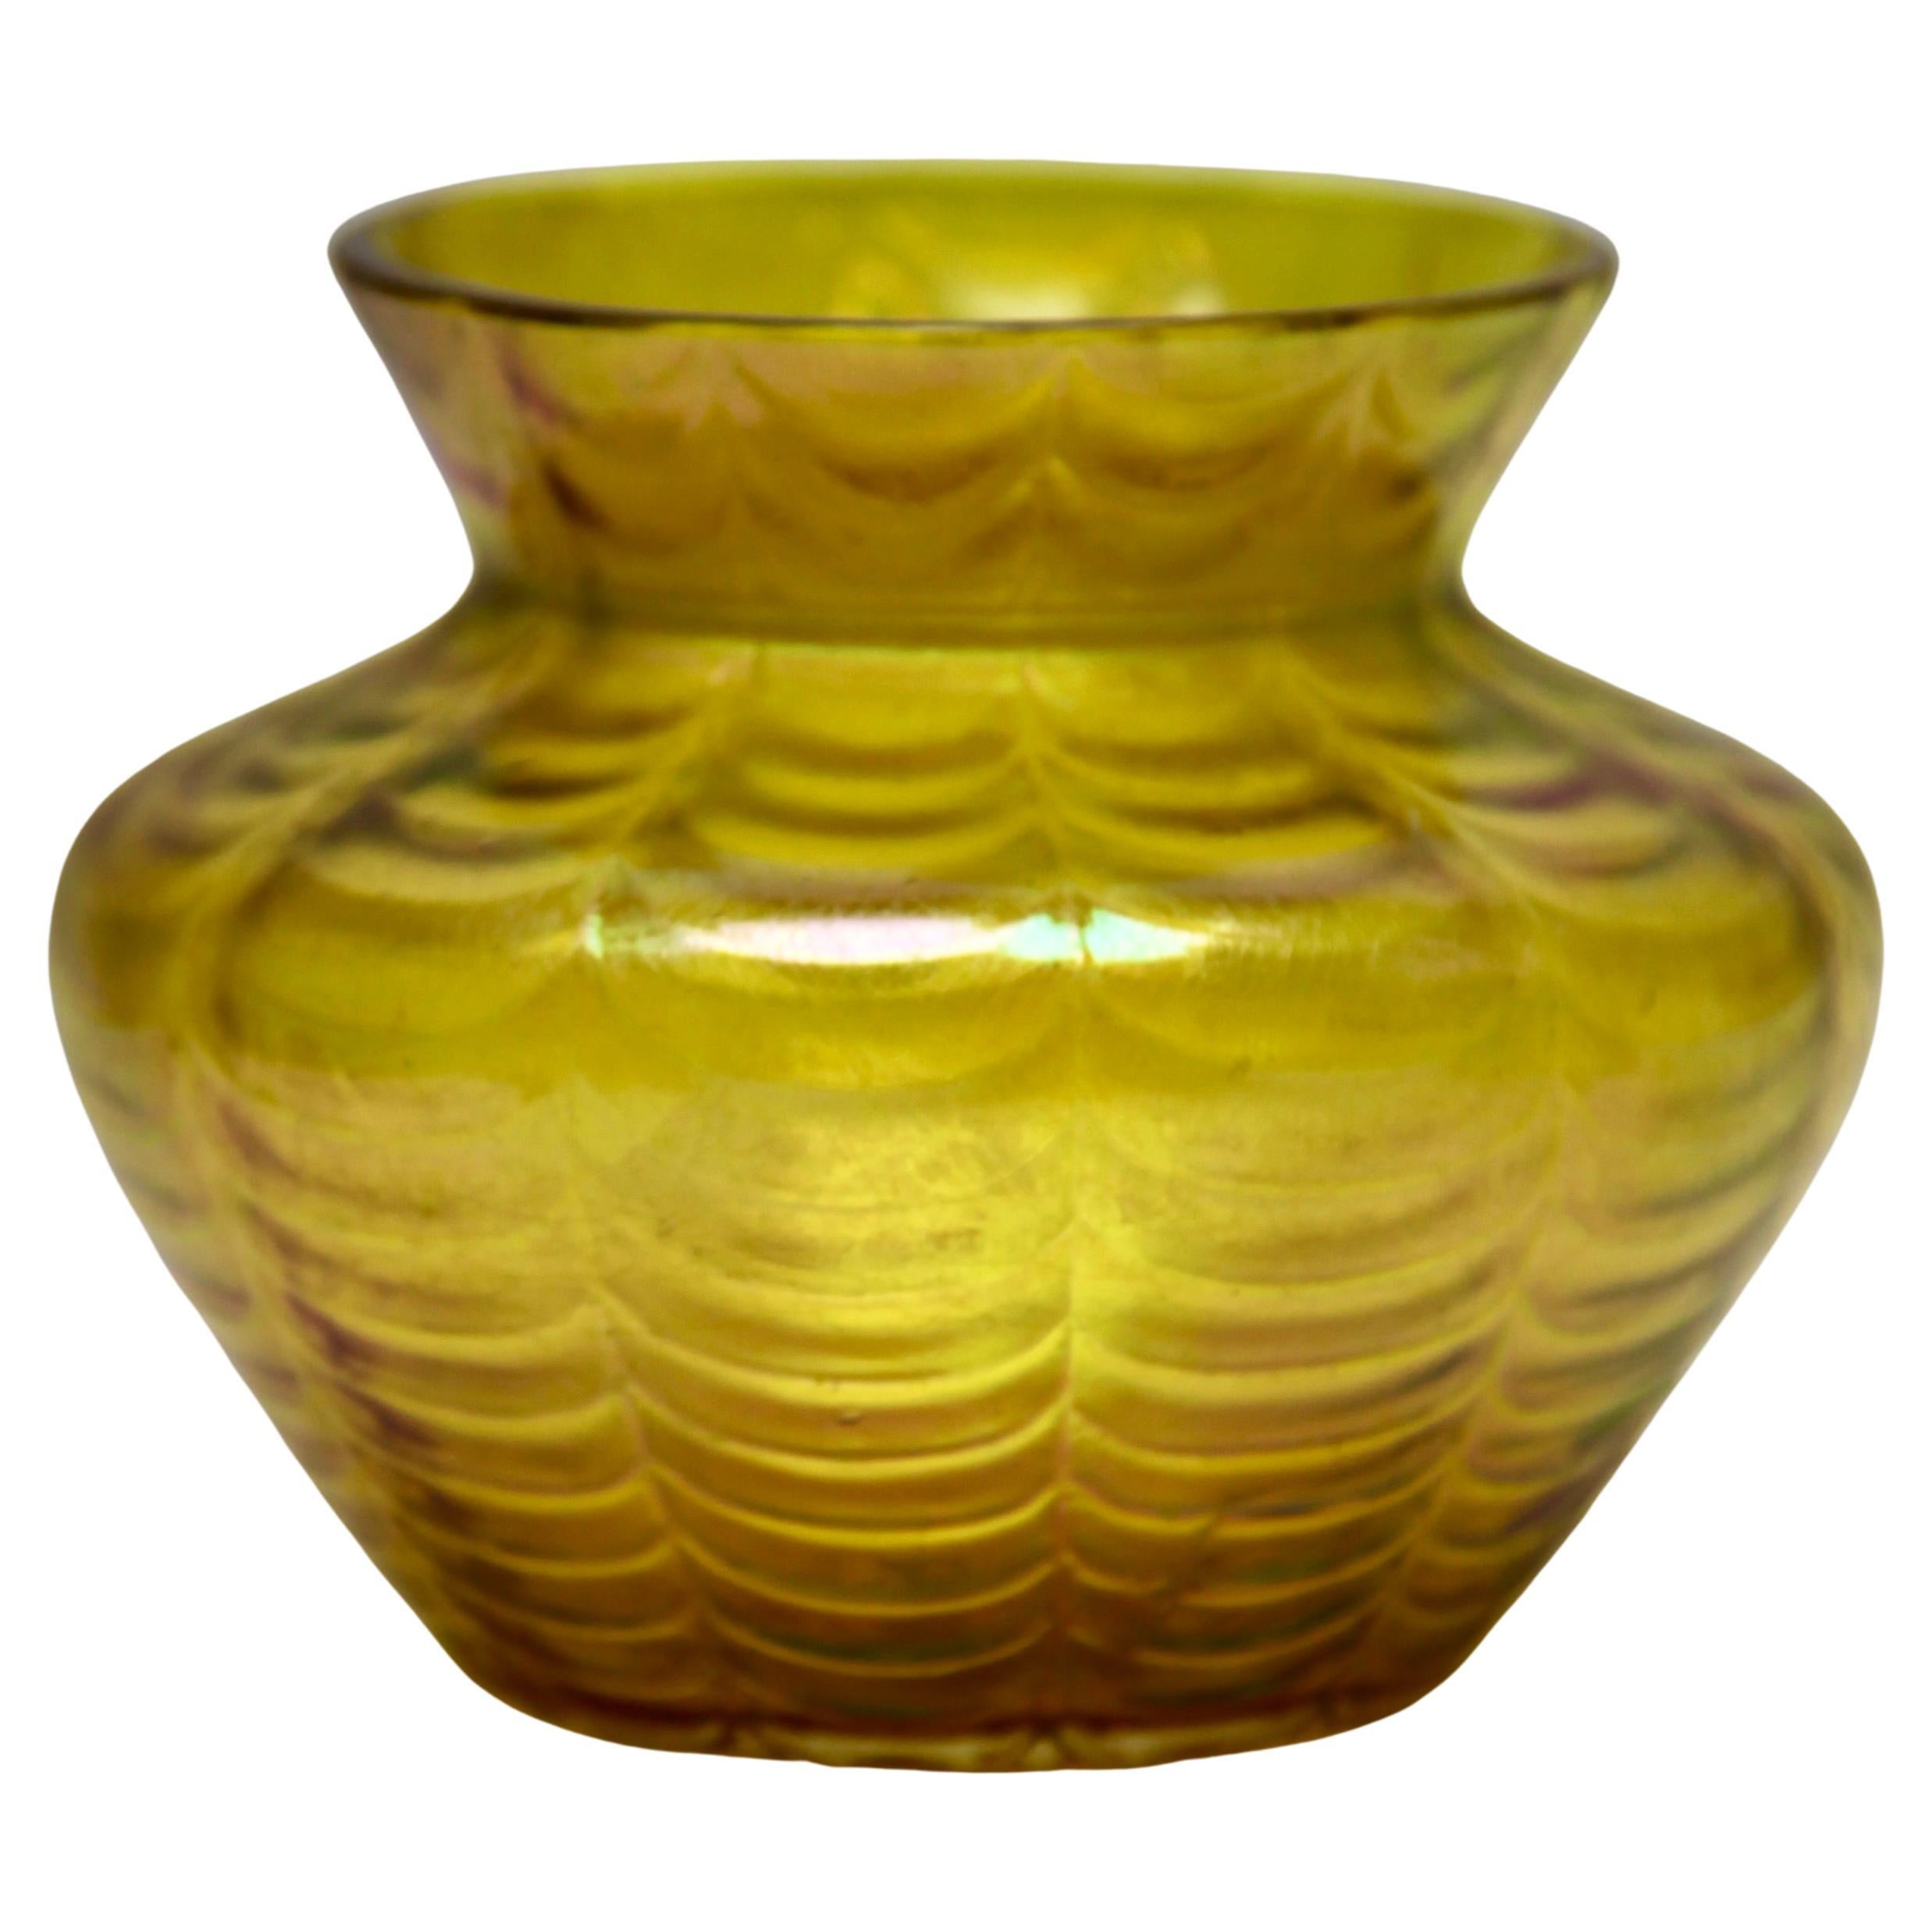 Loetz Art Nouveau vase whit Details of Irradiated glass 1900s For Sale